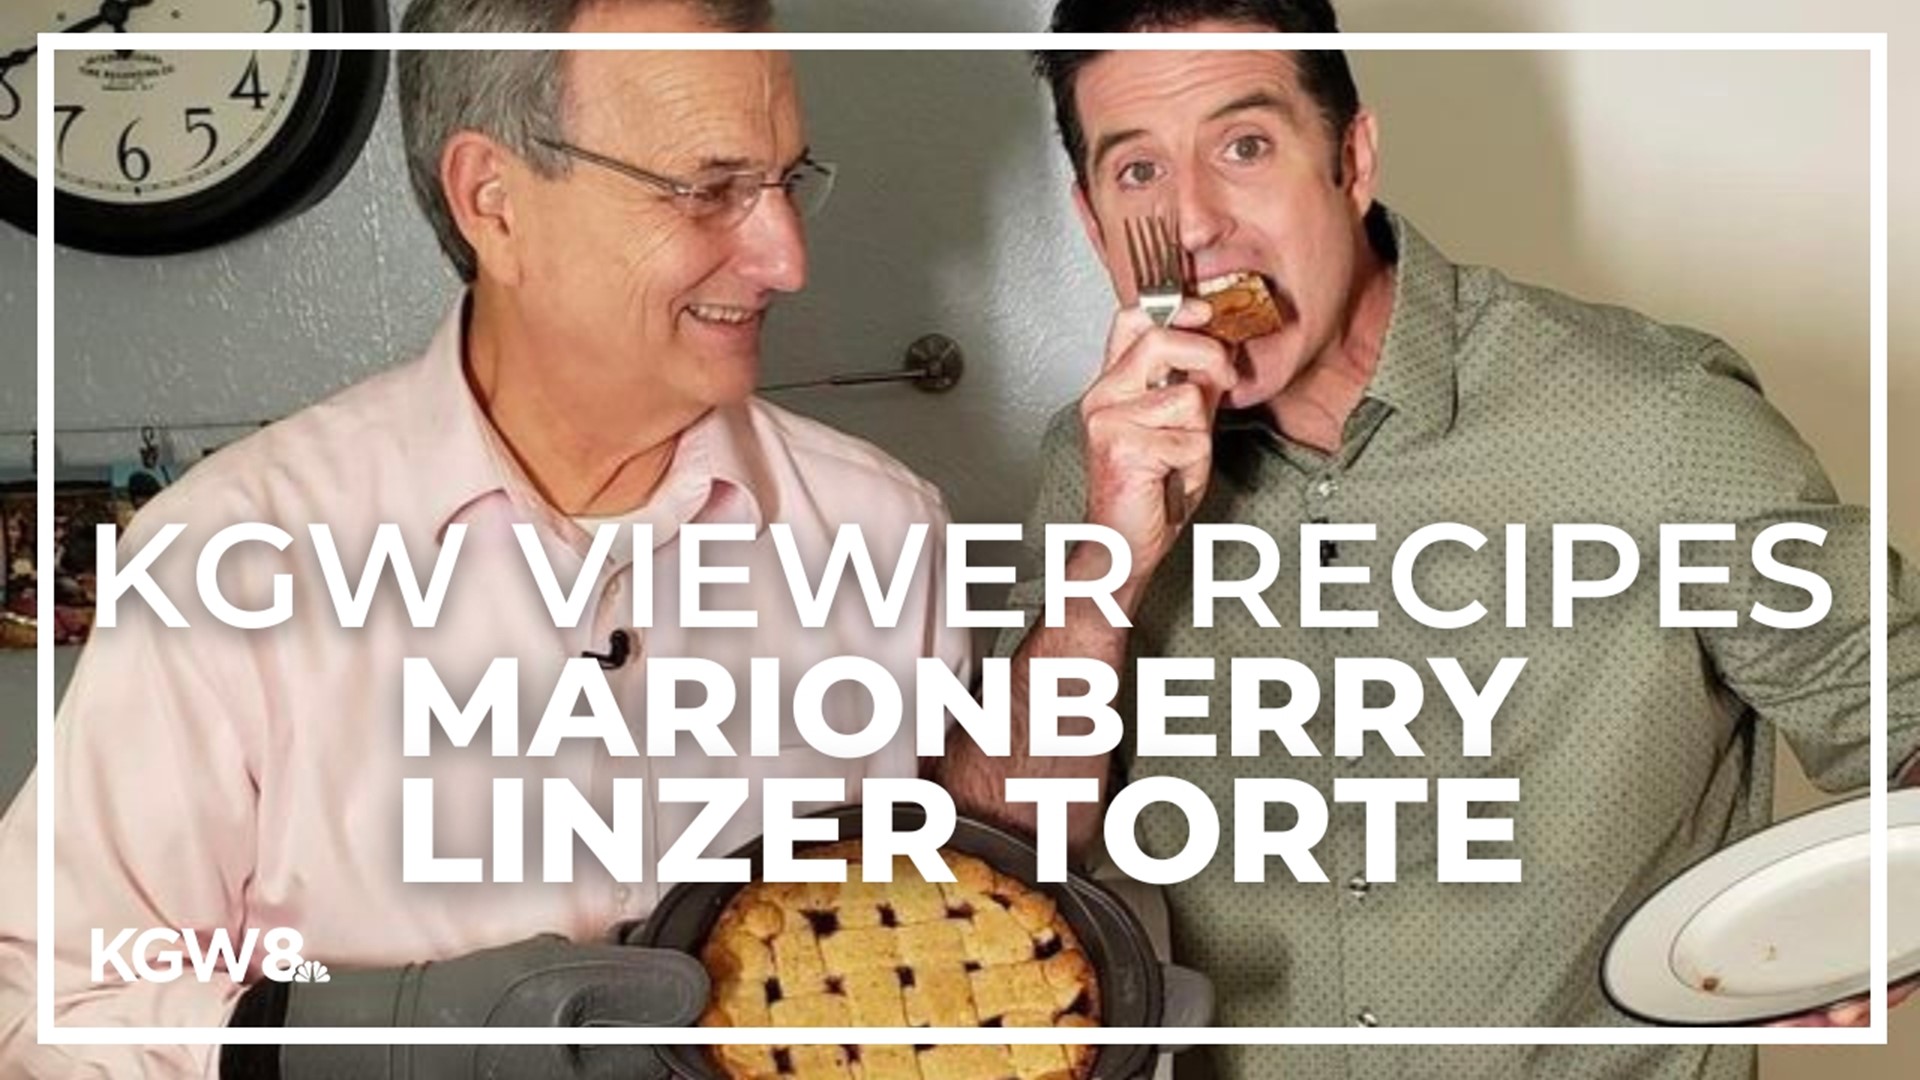 A KGW viewer shared with KGW's Drew Carney his Marionberry Linzer Torte recipe for Thanksgiving. This is Part 5 of a five-part KGW viewer recipe series.